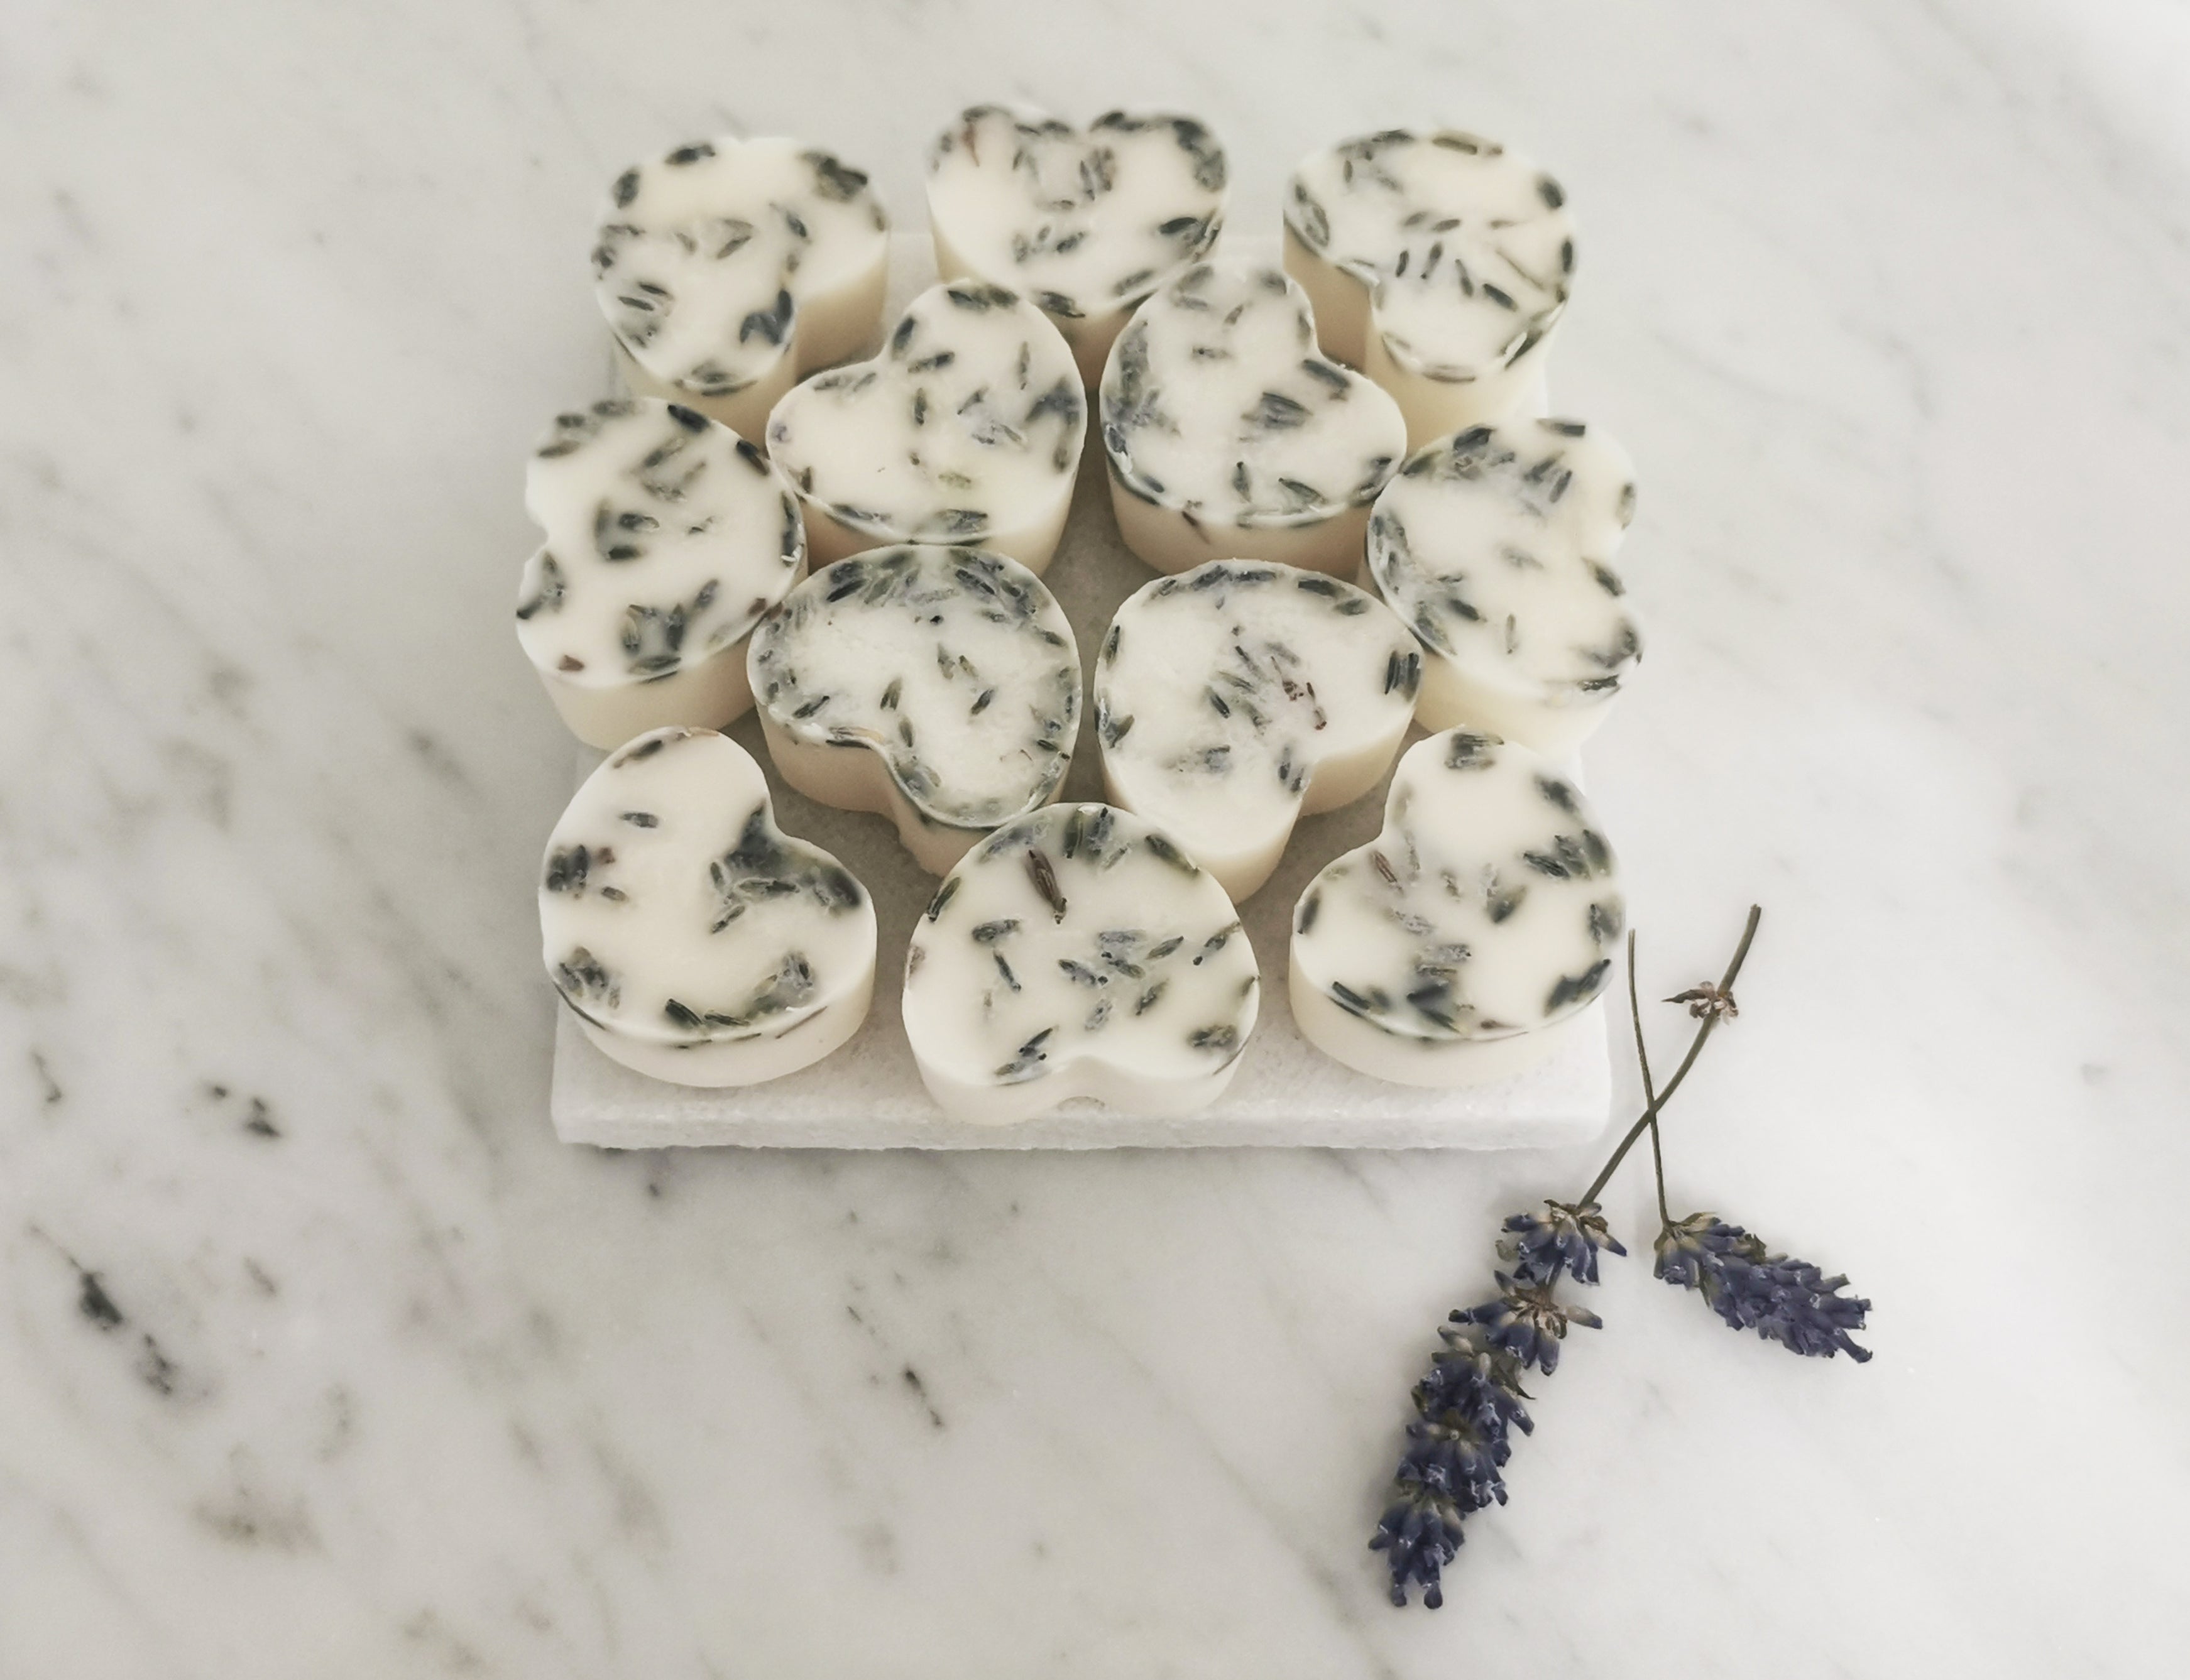 Lavender & Ylang Ylang Aromatherapy Naturally Scented Wax Melts with Lavender petals